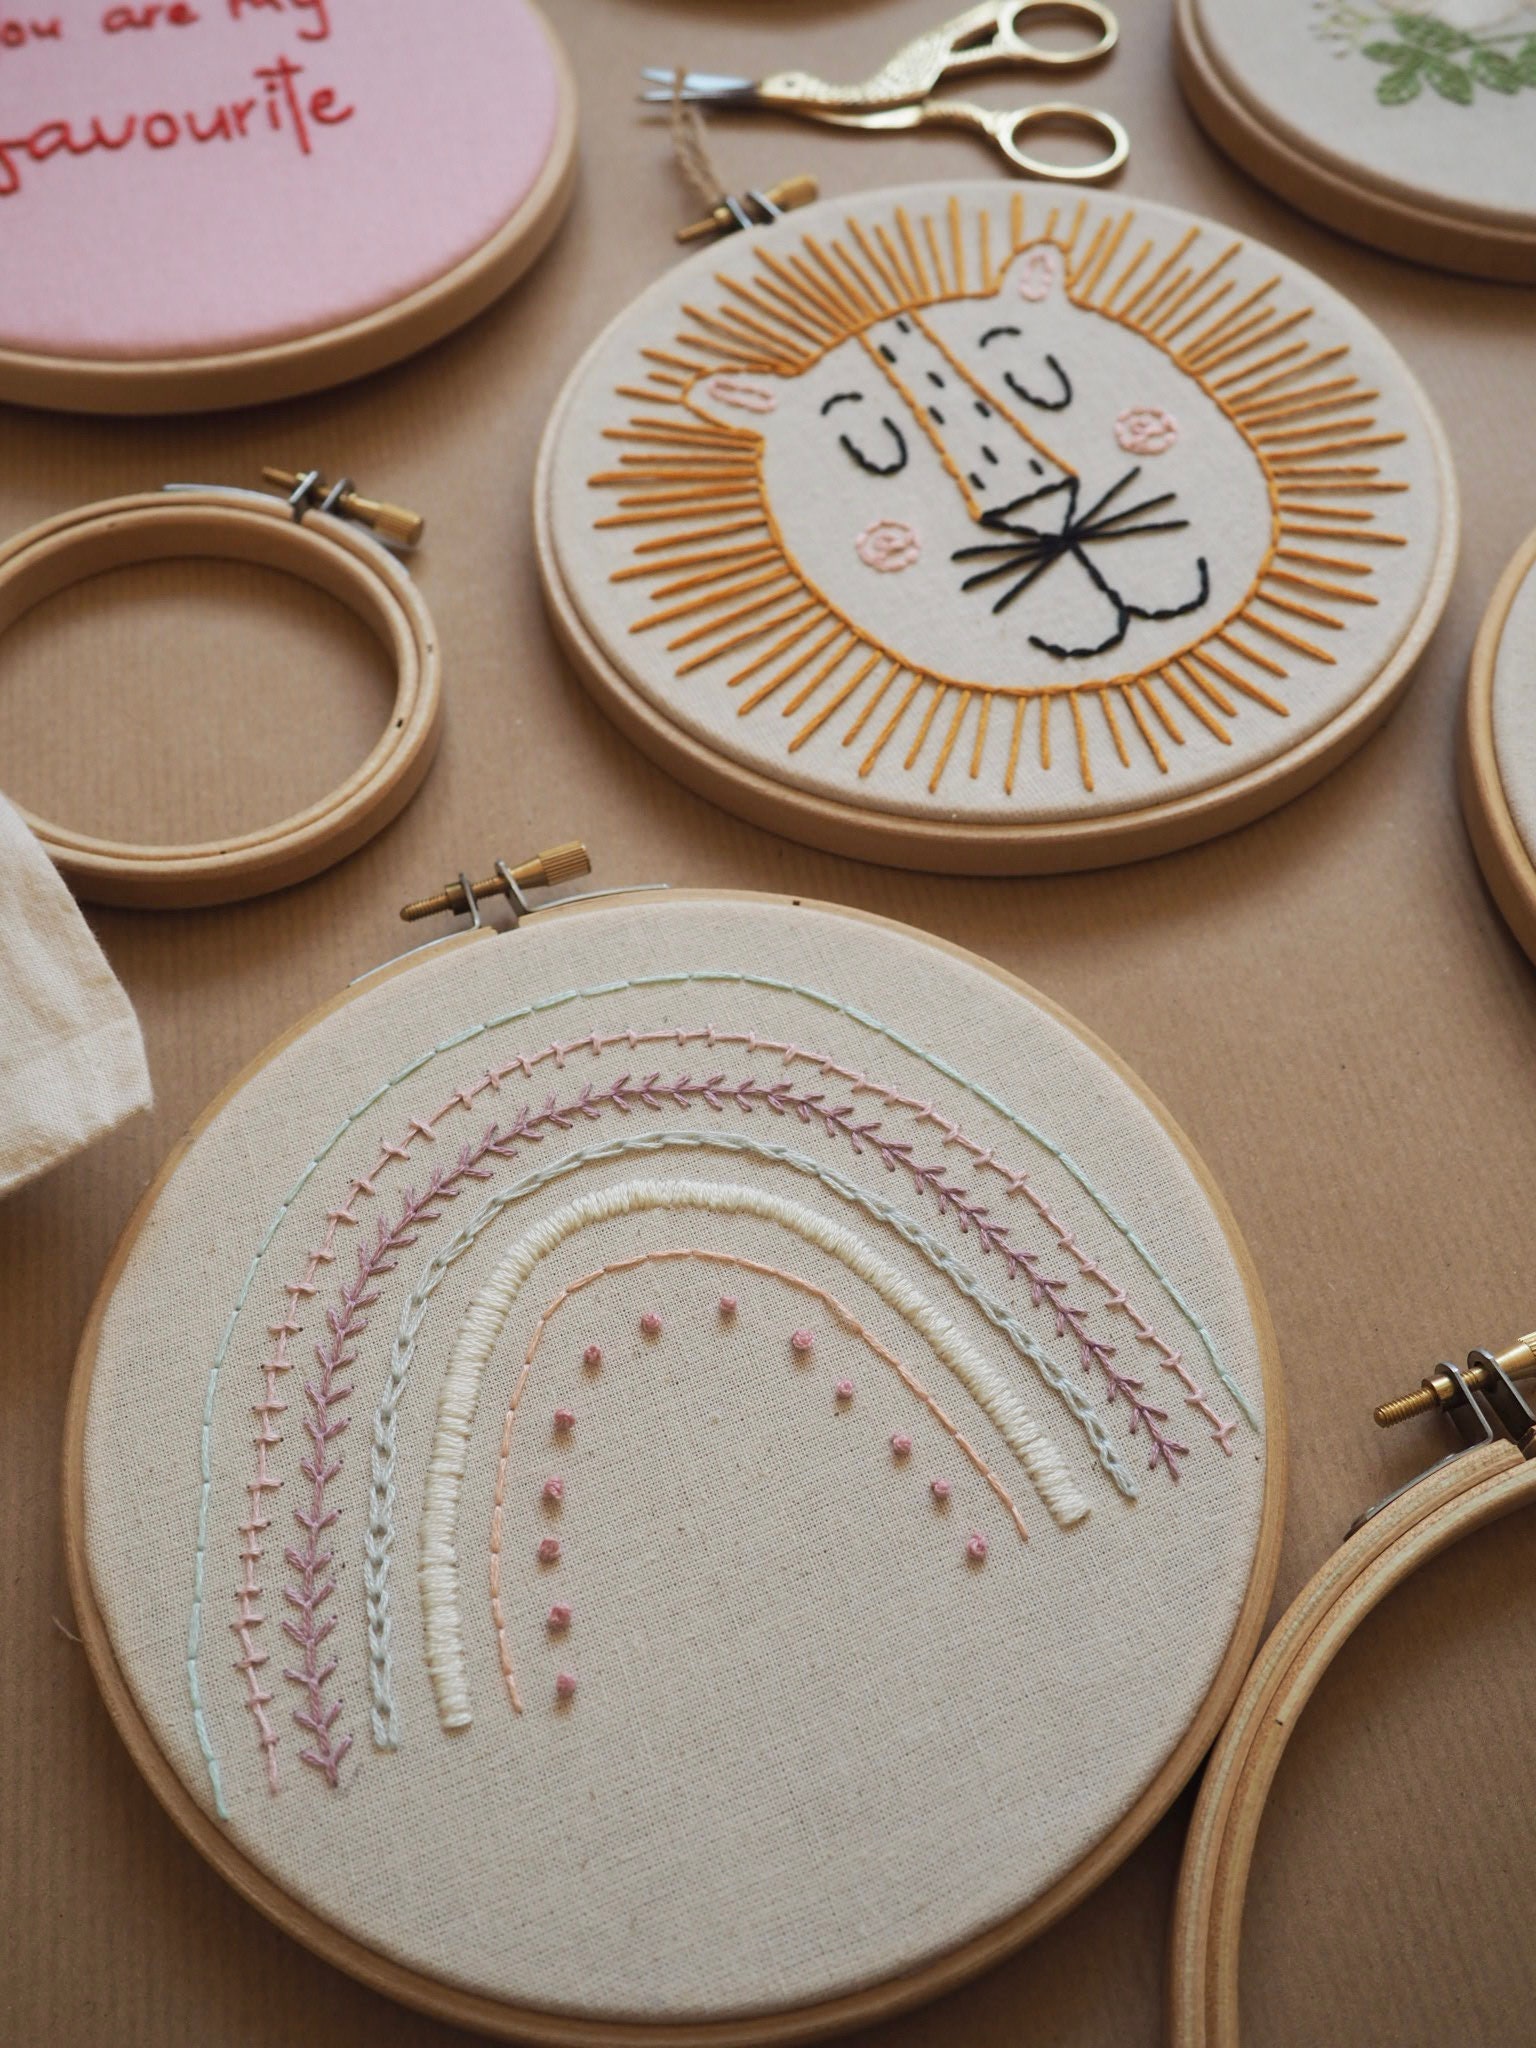 Lion Embroidery Kit for Beginners - Hand Embroidery at Weekend Kits